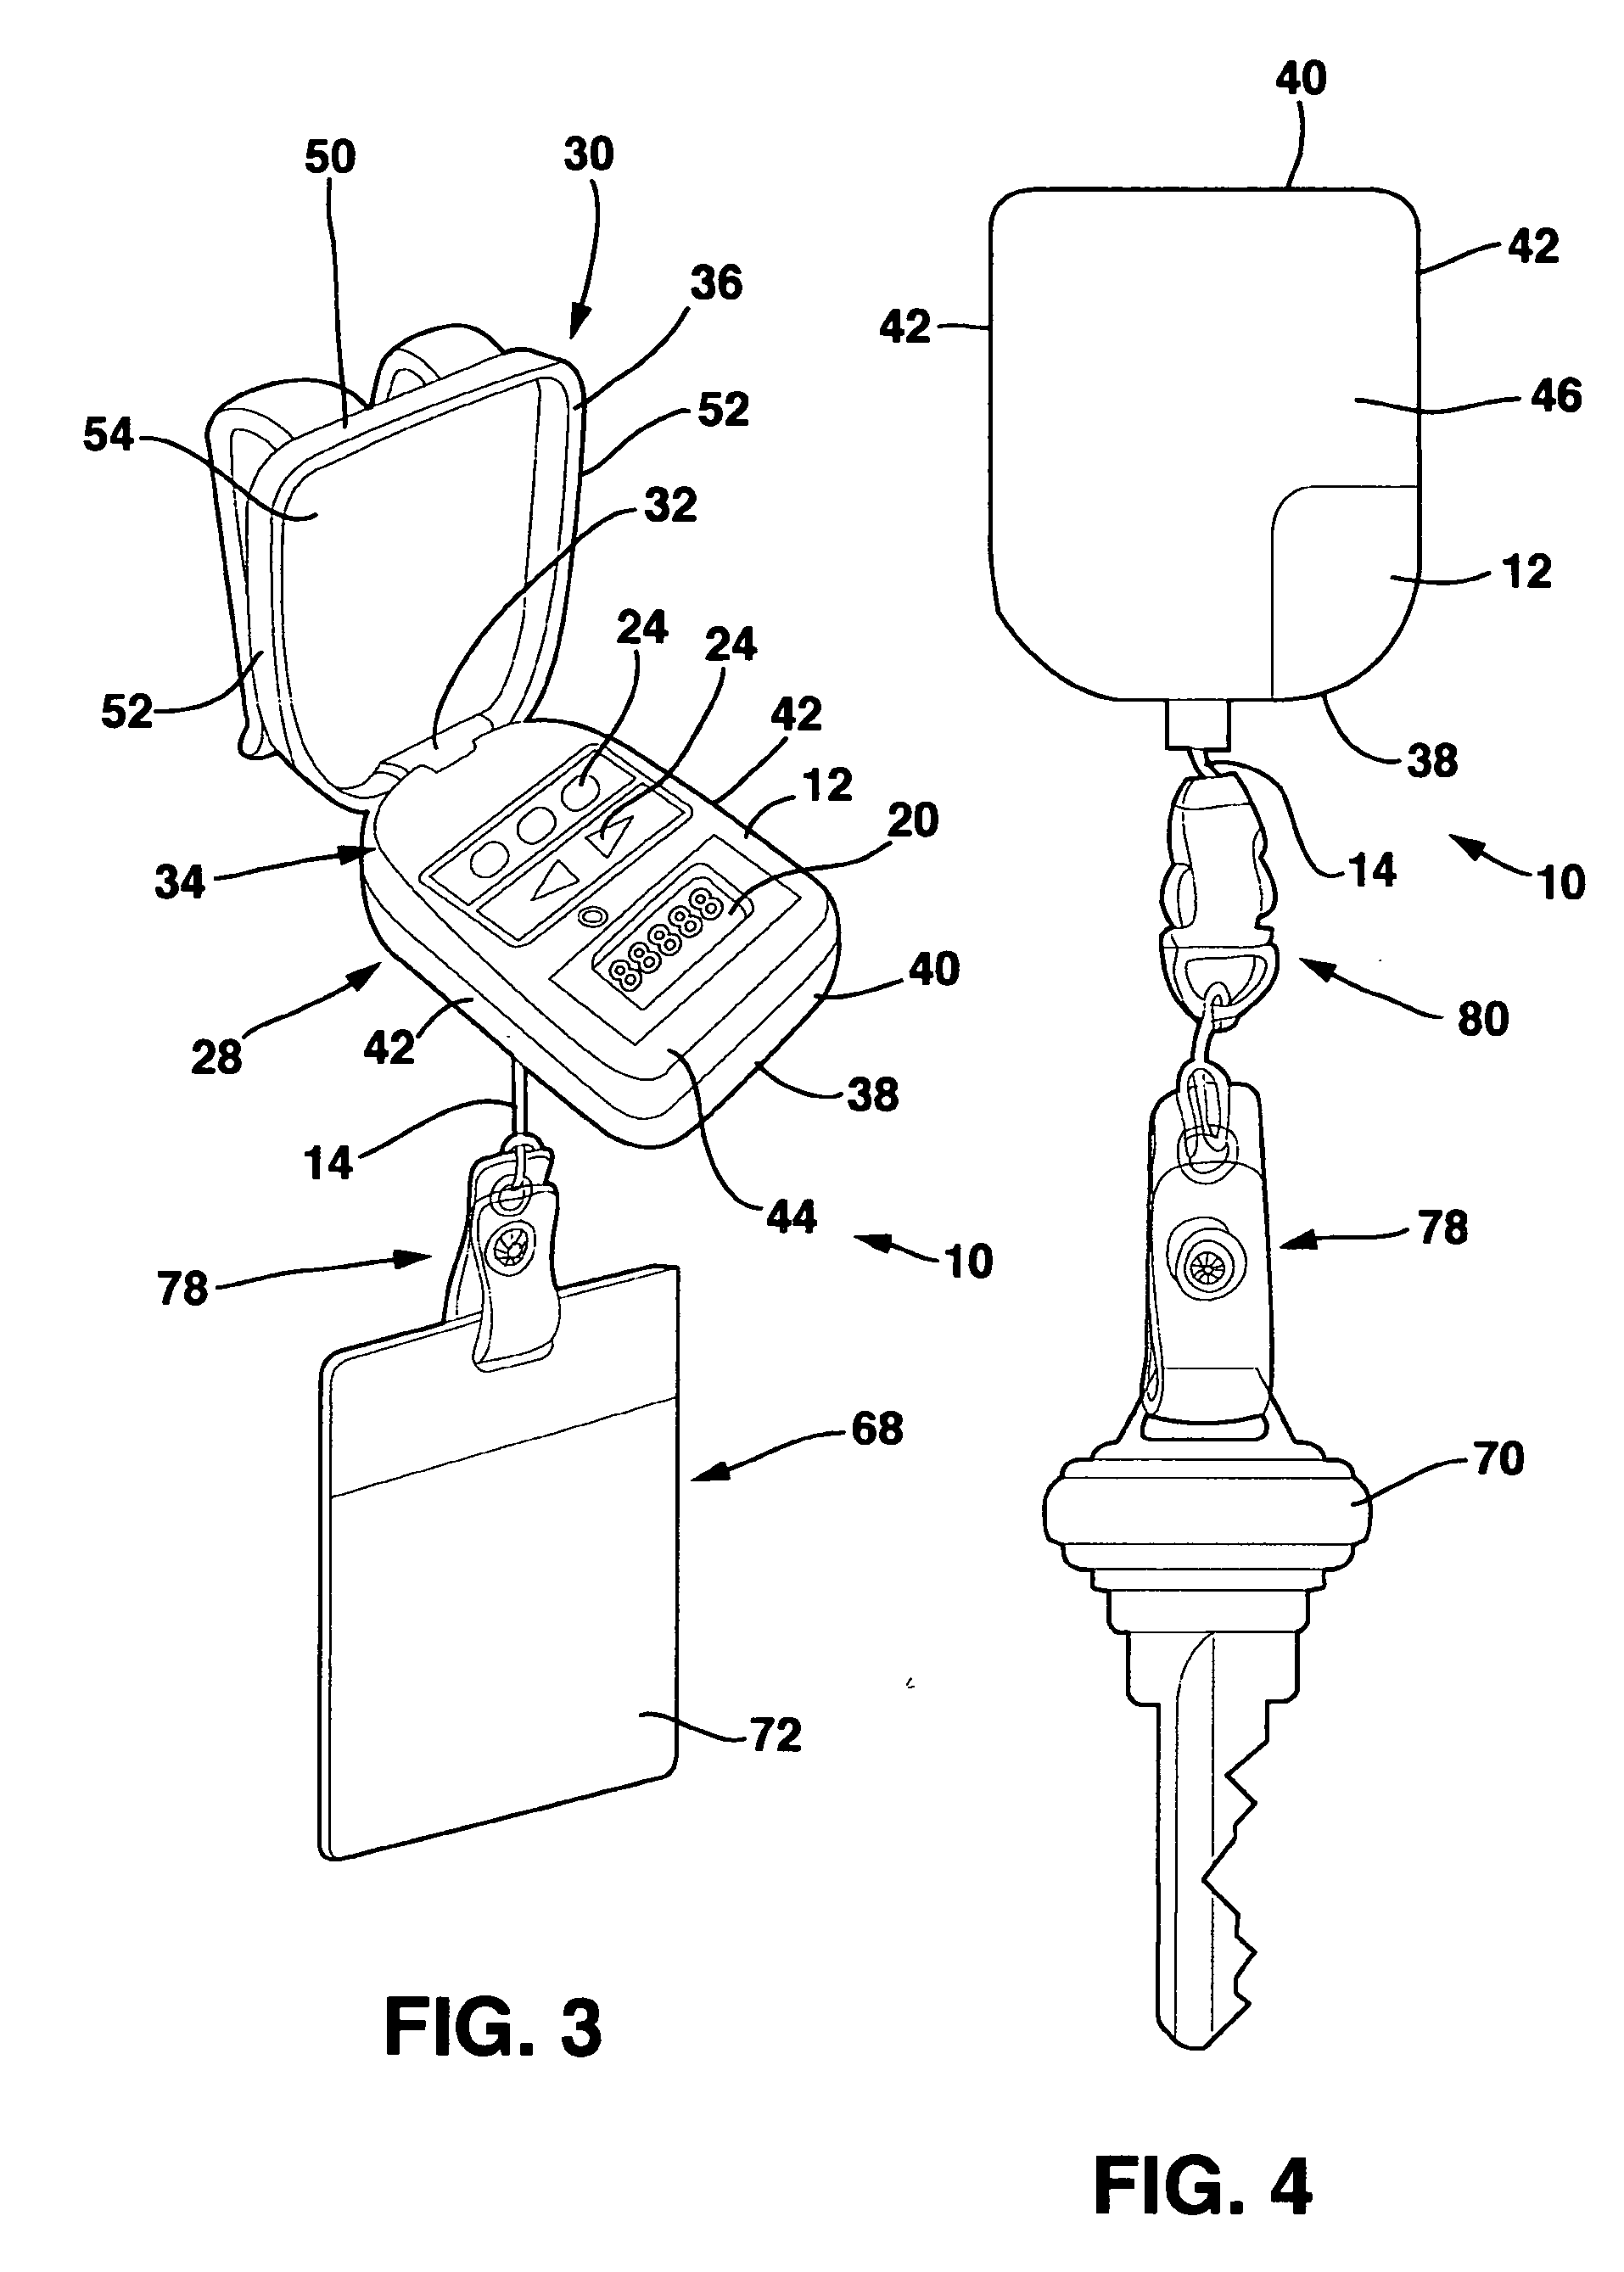 Personal device with tether system and method of use